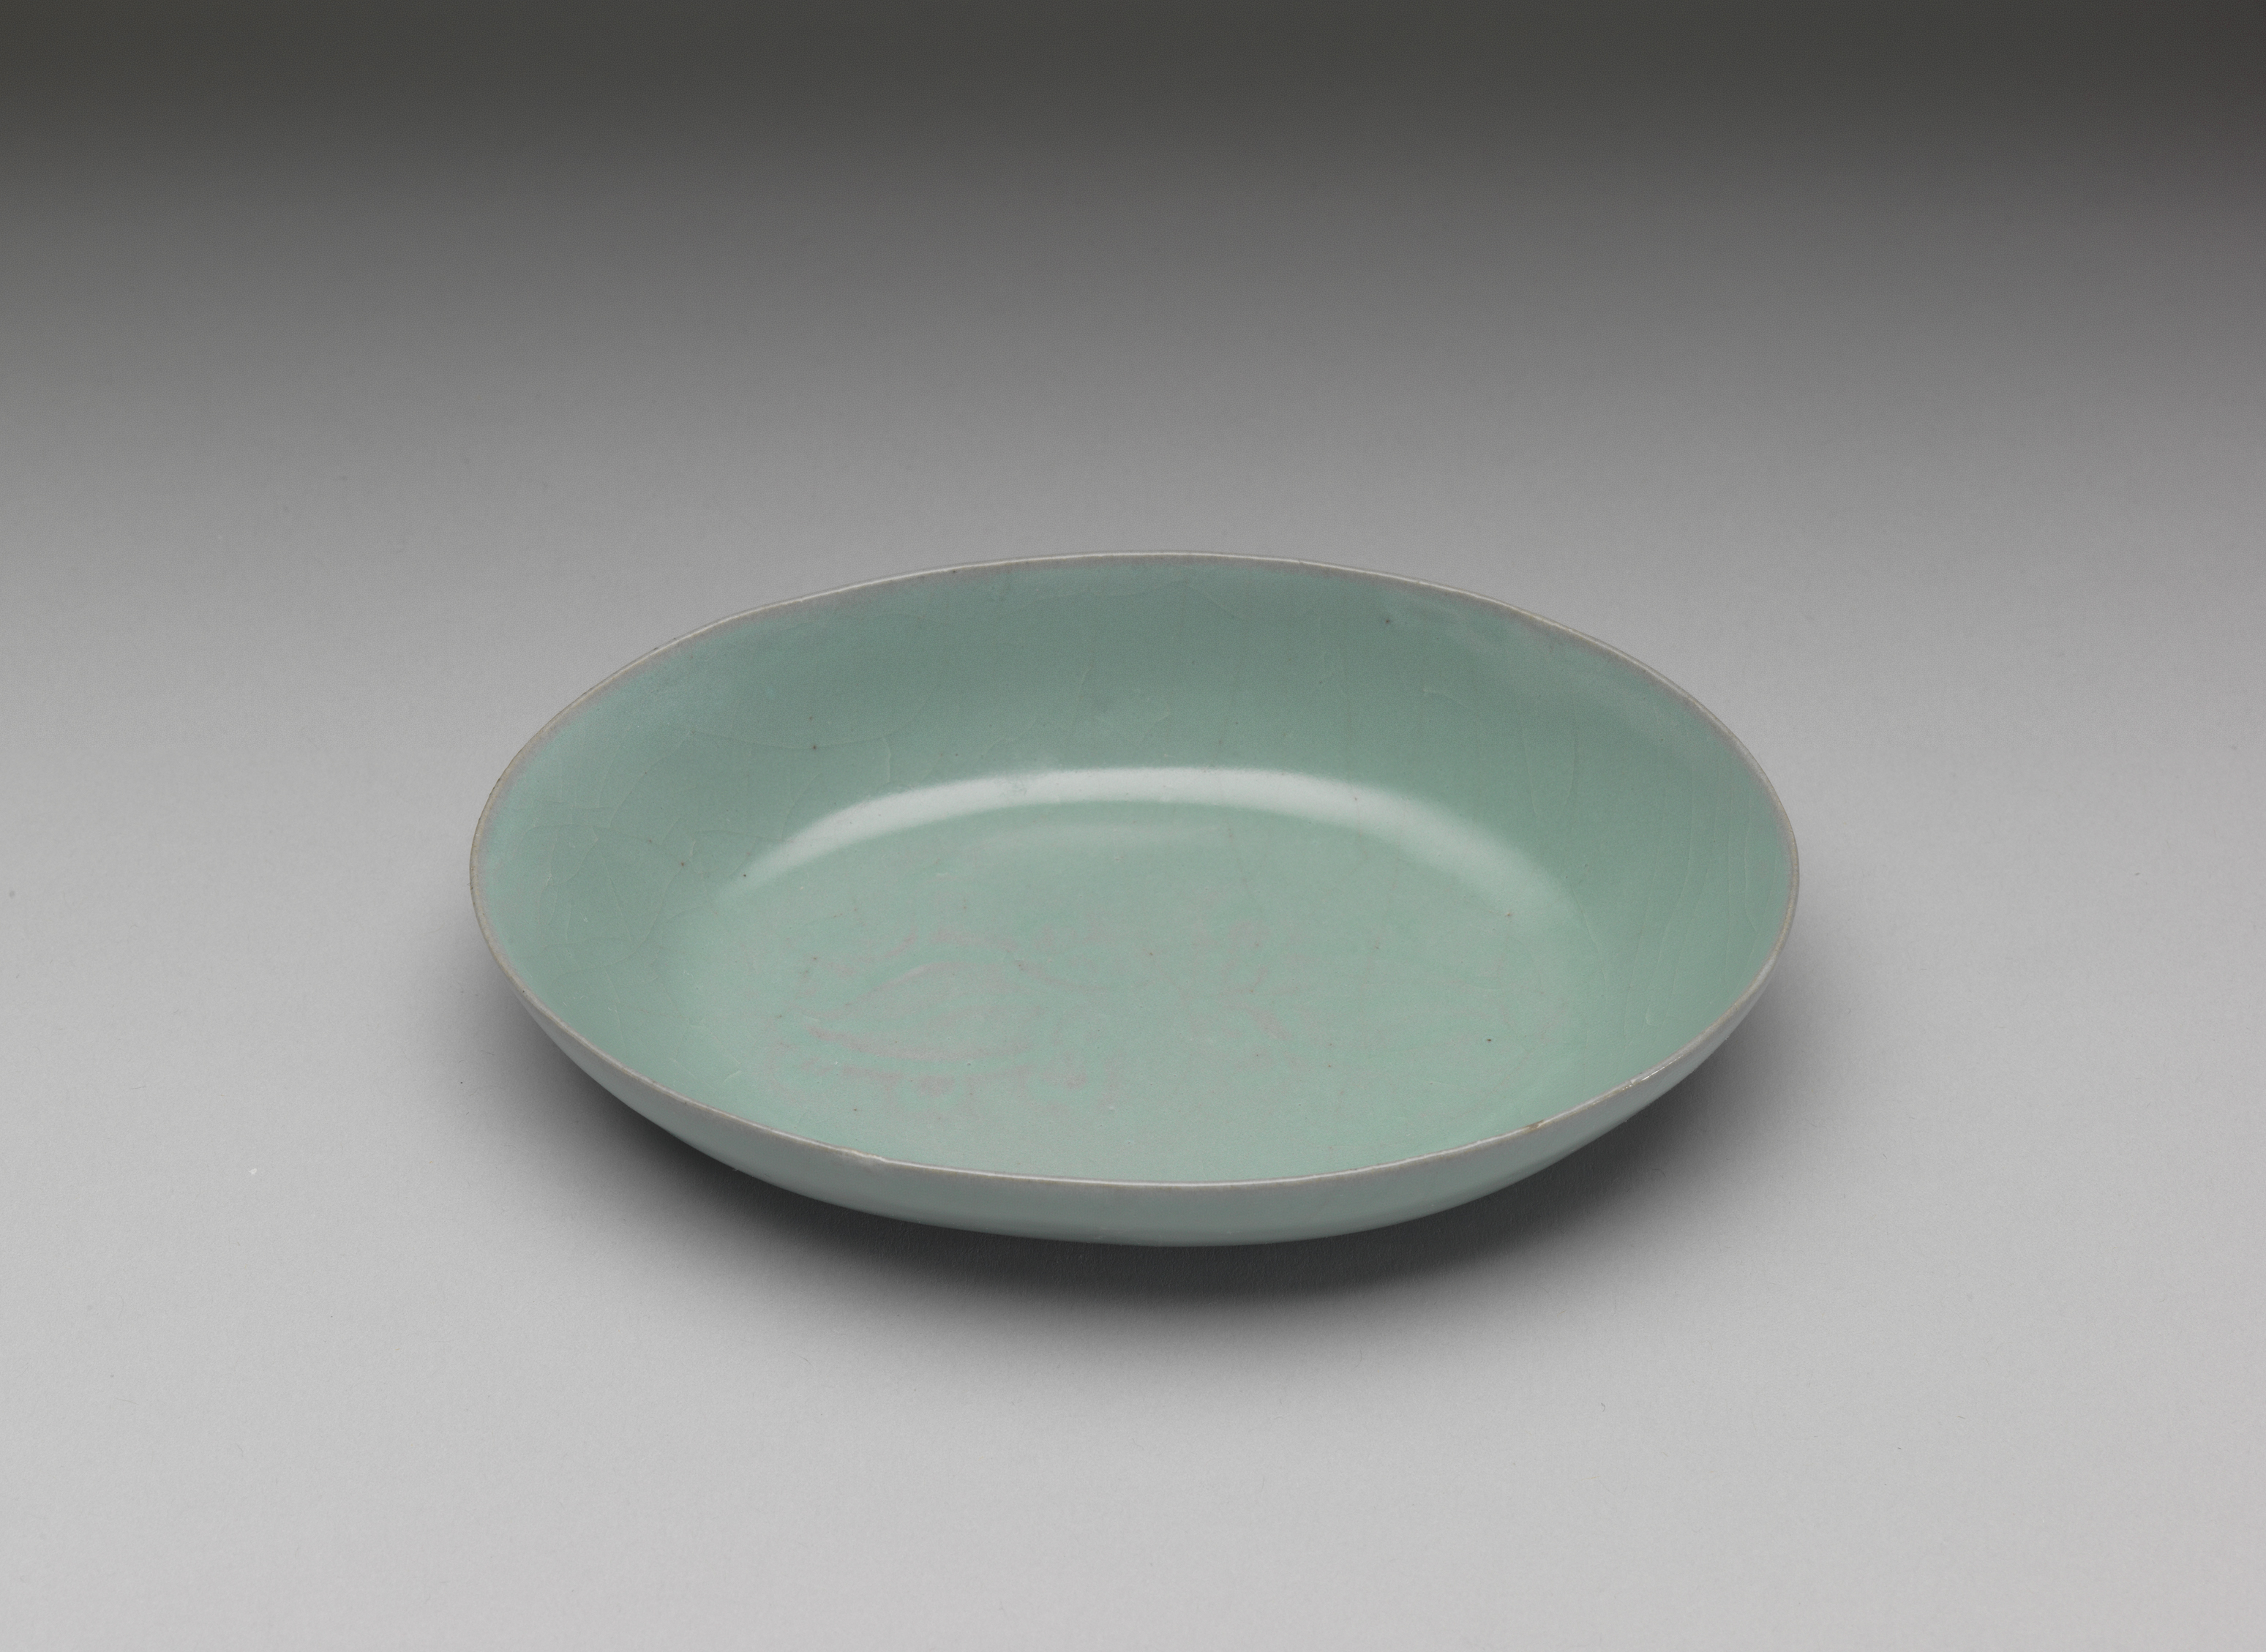 Oval dish with celadon glaze
Ru ware, Northern Song dynasty, late 11th- early 12th century
